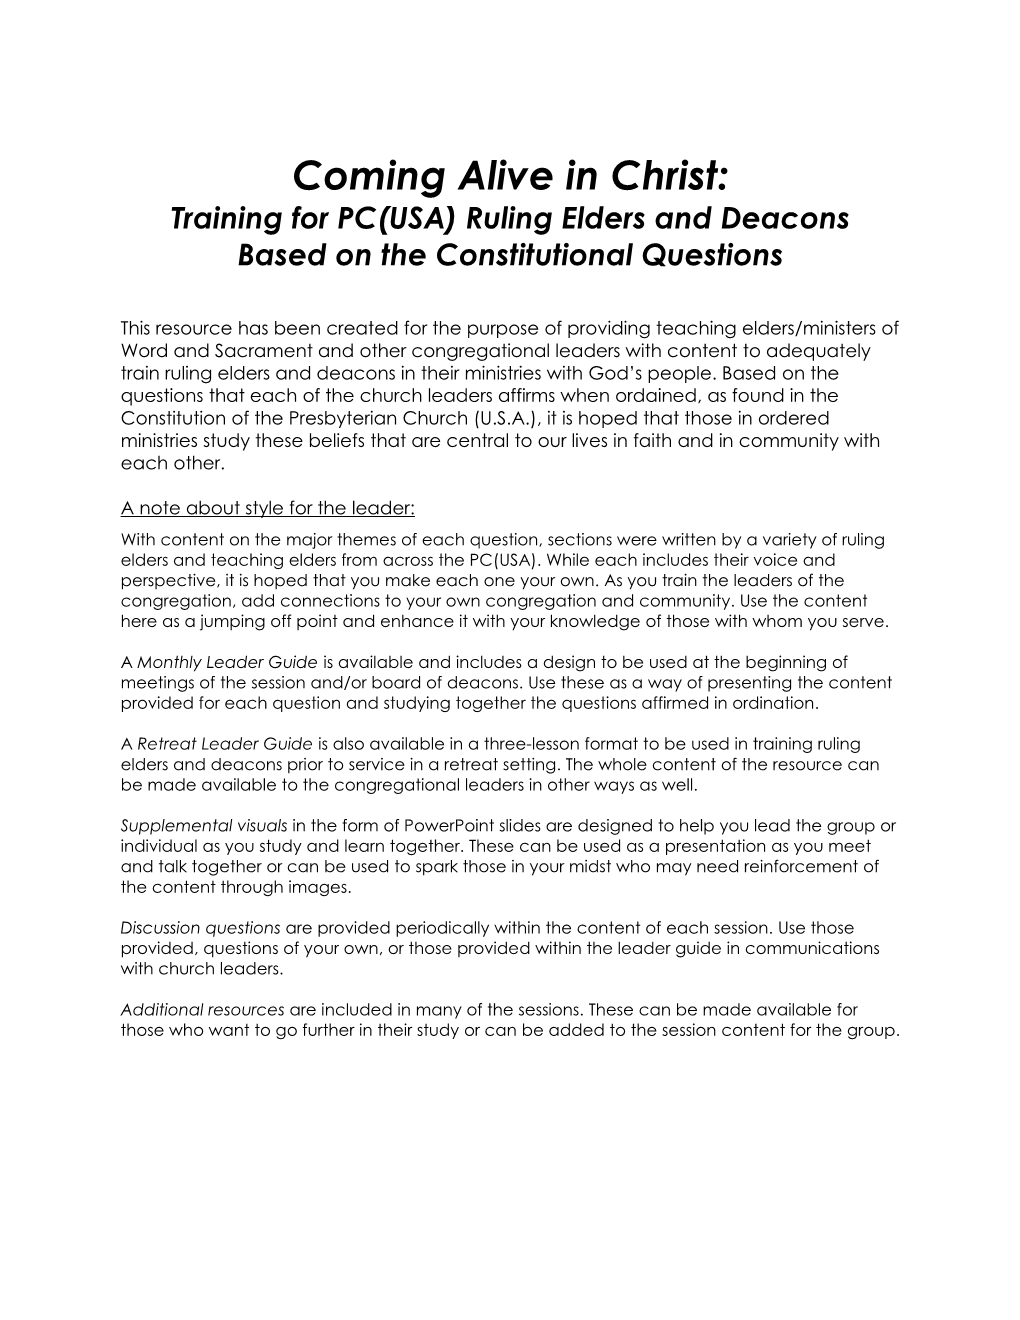 Coming Alive in Christ: Training for PC(USA) Ruling Elders and Deacons Based on the Constitutional Questions